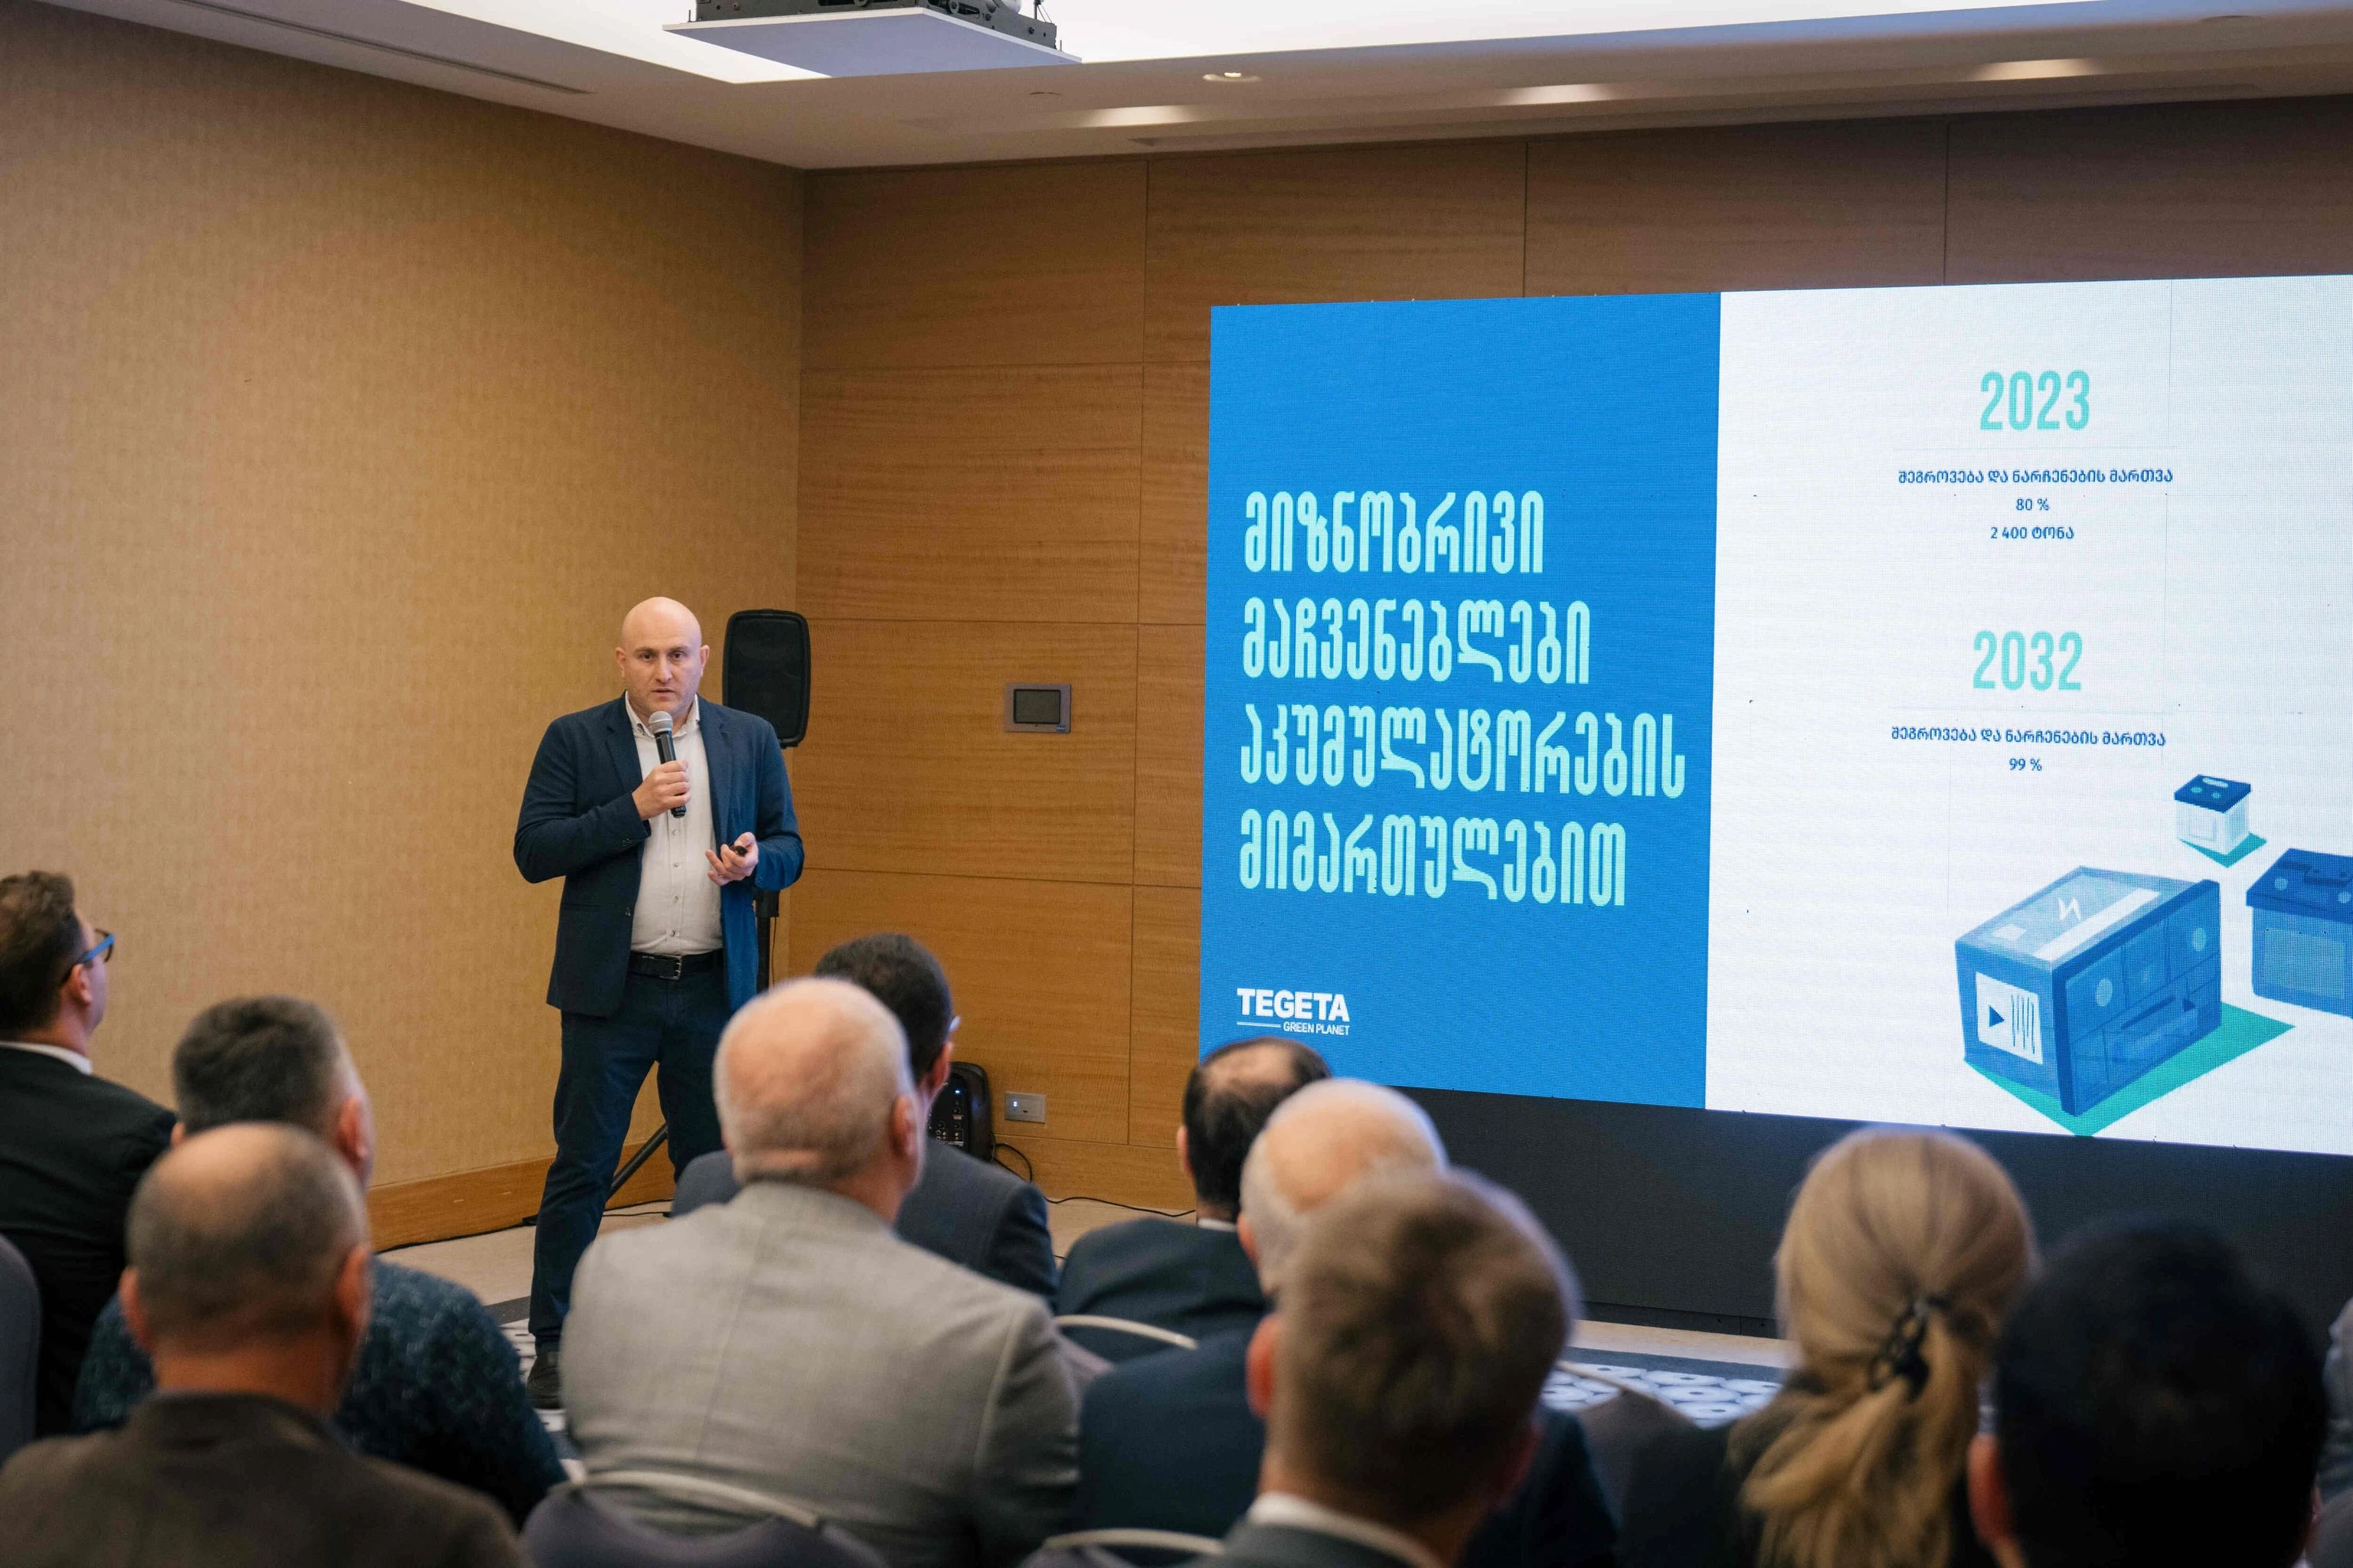 The “Tegeta Green Planet” company held a presentation for its partners in Batumi about the Extended Producer Responsibility (EPR).